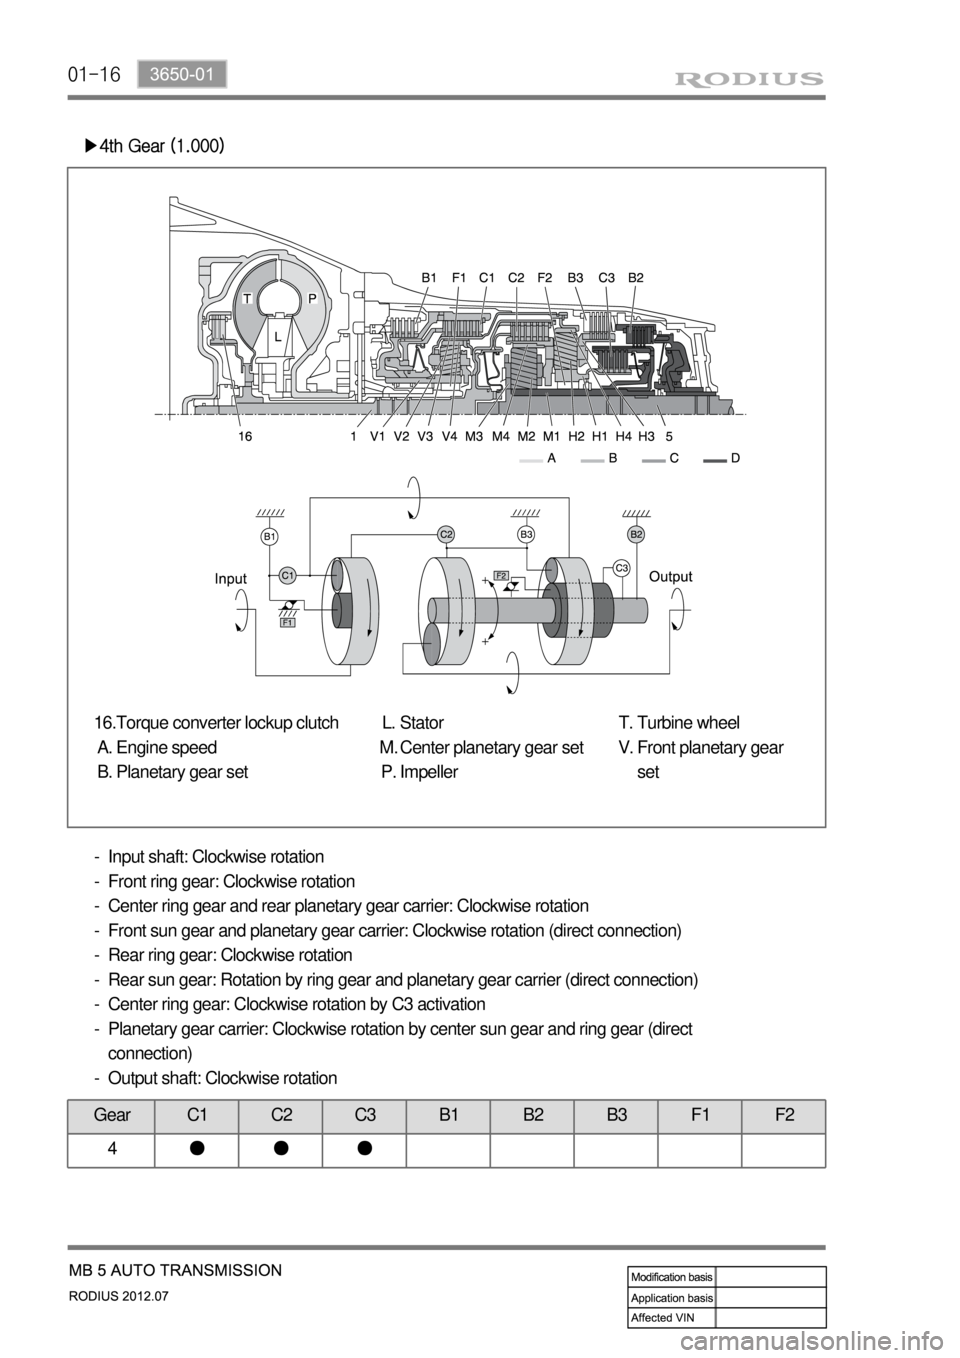 SSANGYONG RODIUS 2012  Service Manual 01-16
▶4th Gear (1.000)
Torque converter lockup clutch
Engine speed
Planetary gear set 16.
A.
B.Stator
Center planetary gear set
Impeller L.
M.
P.Turbine wheel
Front planetary gear
set T.
V.
Input s